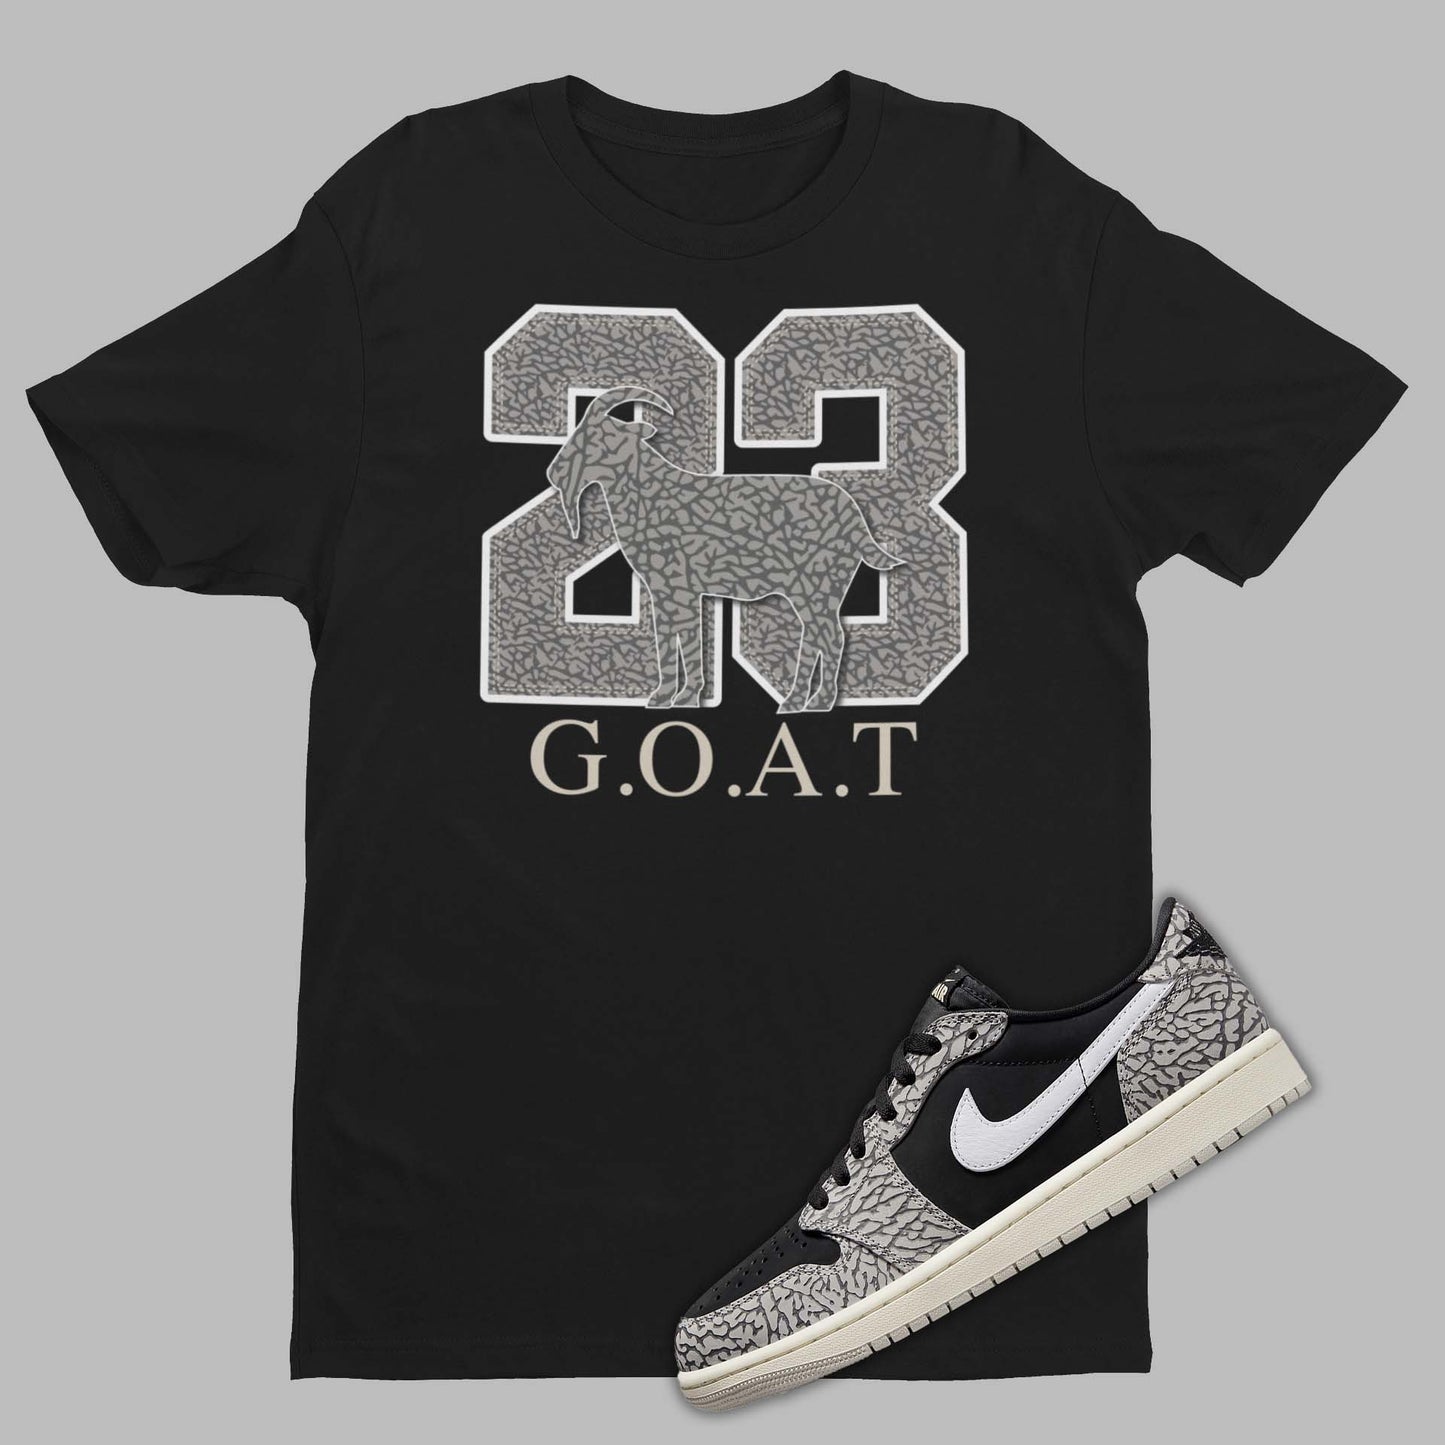 Black Cement 1's matching t-shirt in black with 23 and goat emoji on the front.